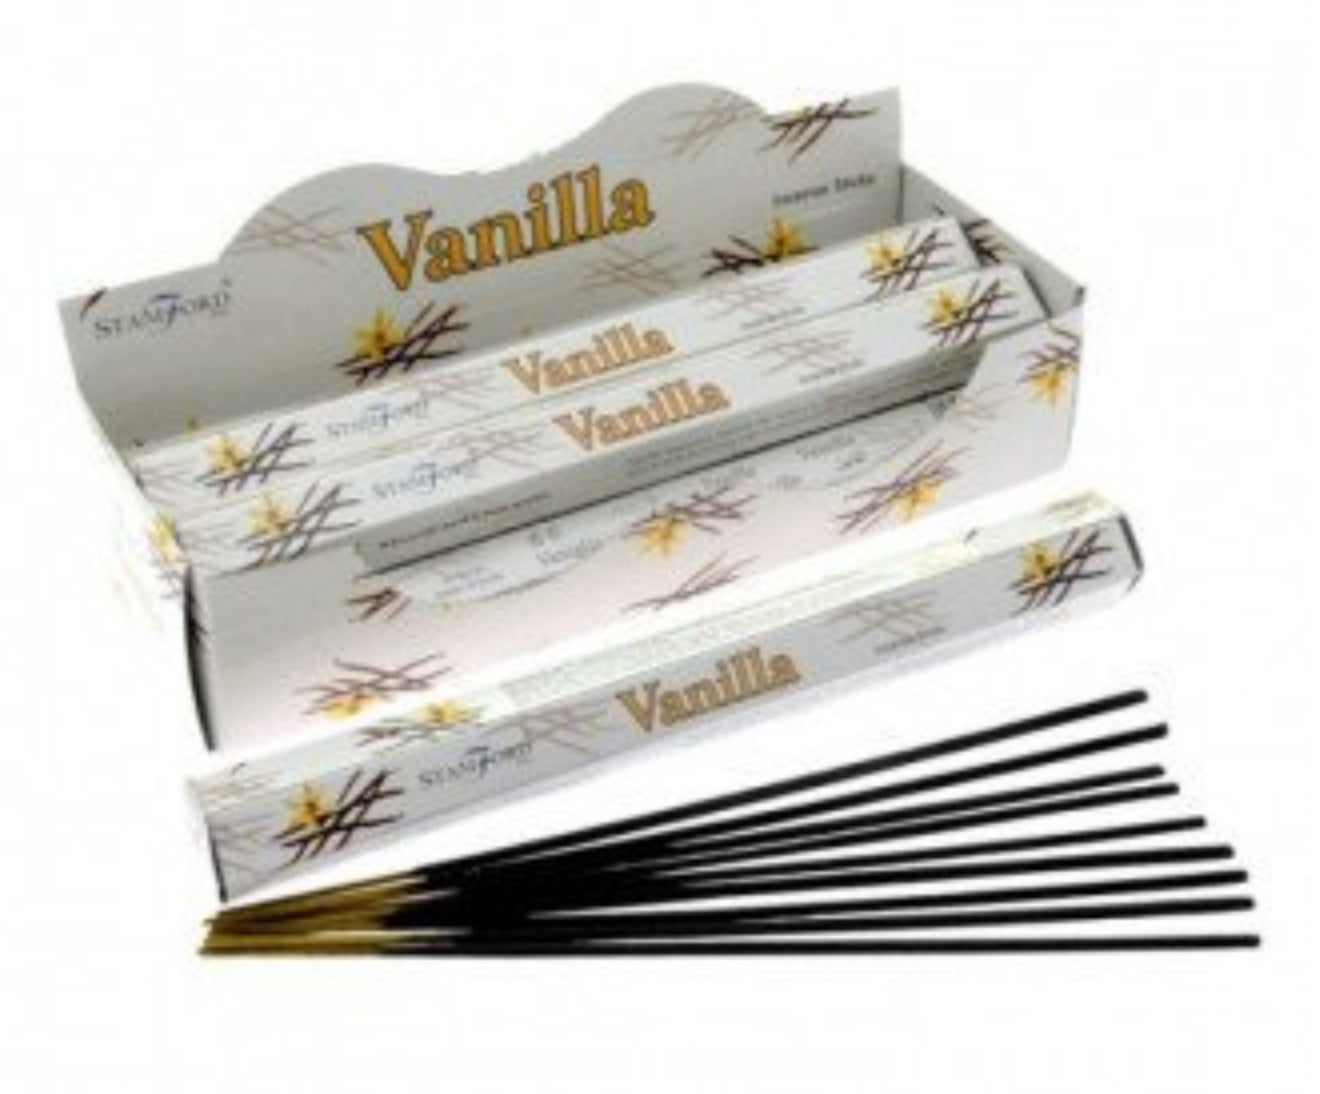 Highly scented Incense Sticks.